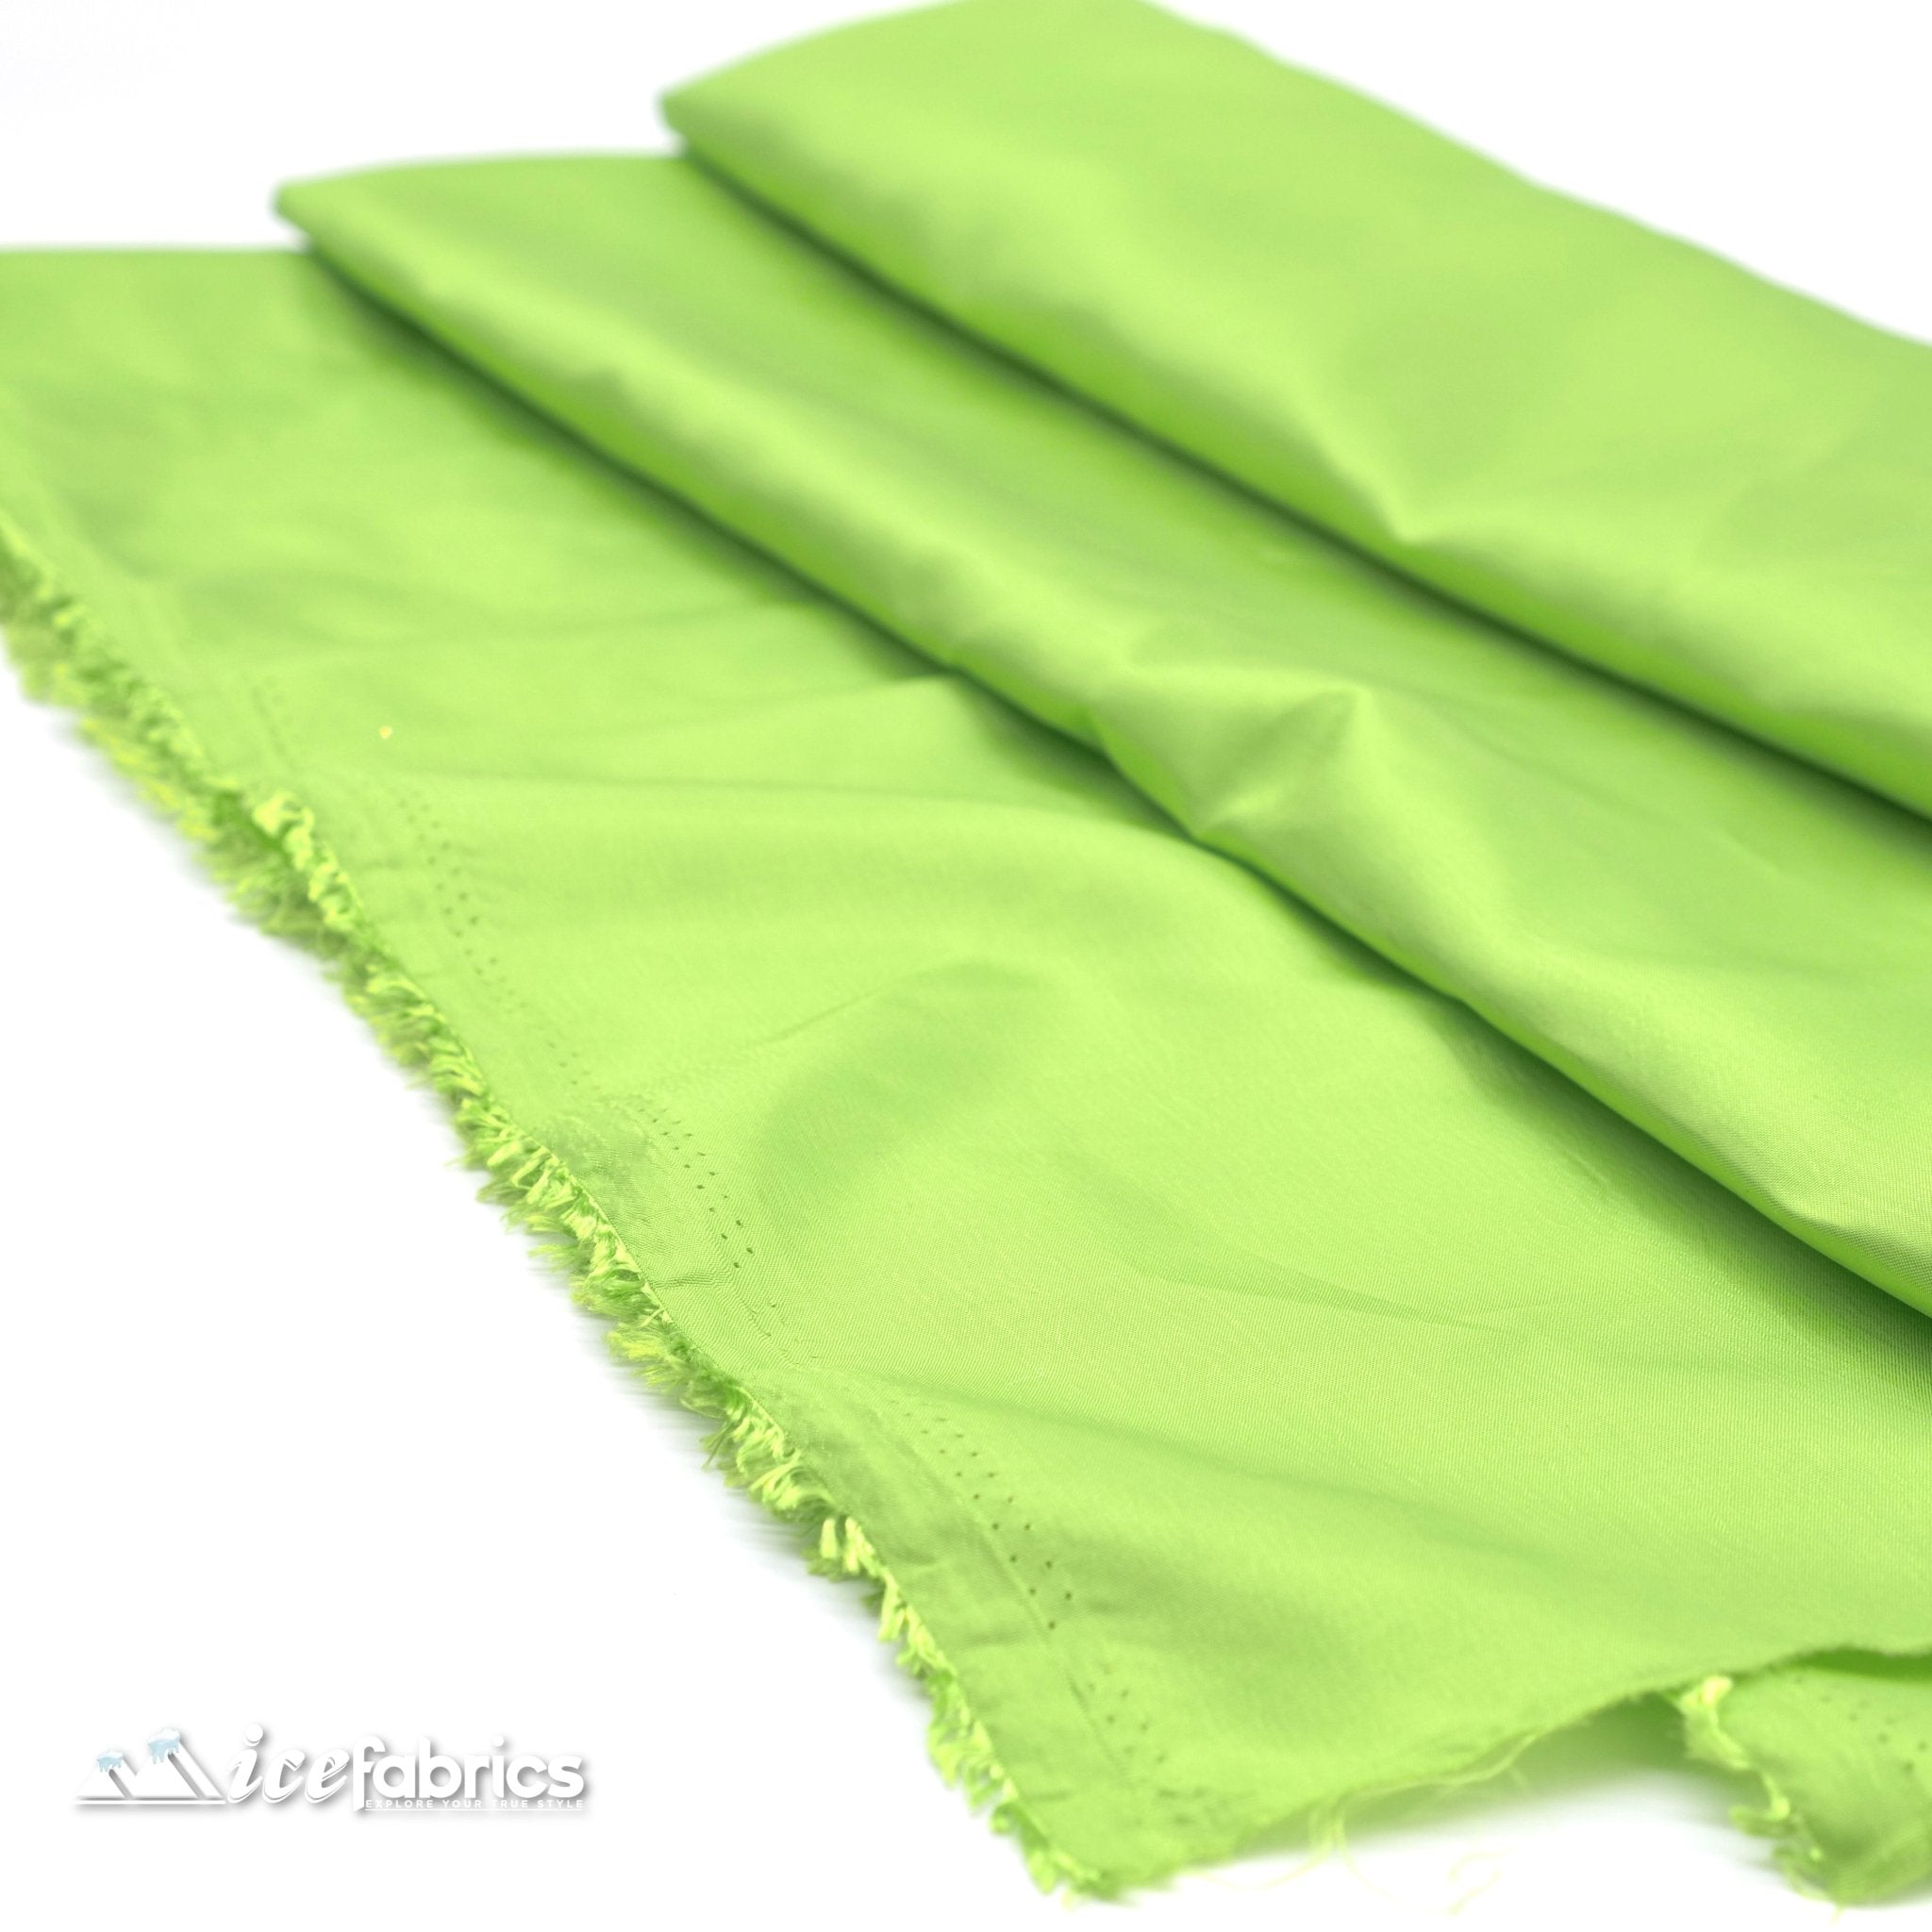 High Quality Solid Taffeta Fabric_ 60" Width_ By The YardTaffeta FabricICEFABRICICE FABRICSLime GreenHigh Quality Solid Taffeta Fabric_ 60" Width_ By The YardTaffeta FabricICEFABRICICE FABRICSLime GreenHigh Quality Solid Taffeta Fabric_ 60" Width_ By The Yard ICEFABRIC Lime Green